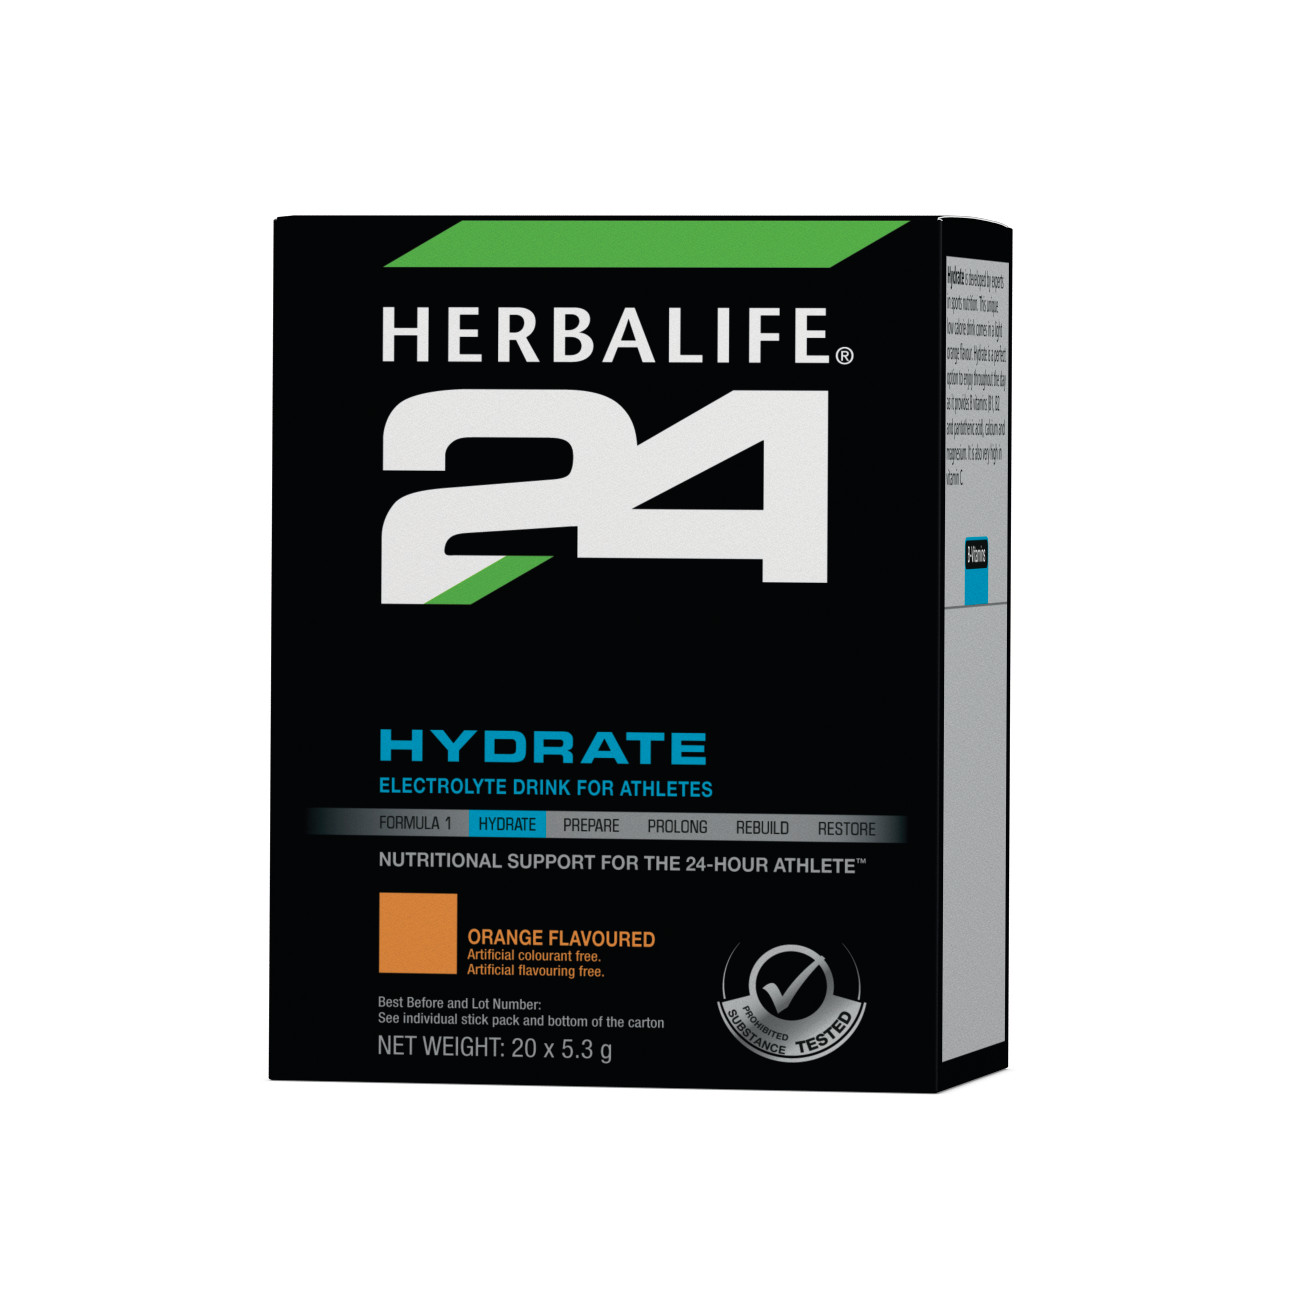 Herbalife24® Hydrate Electrolyte Drink Orange Flavoured product shot